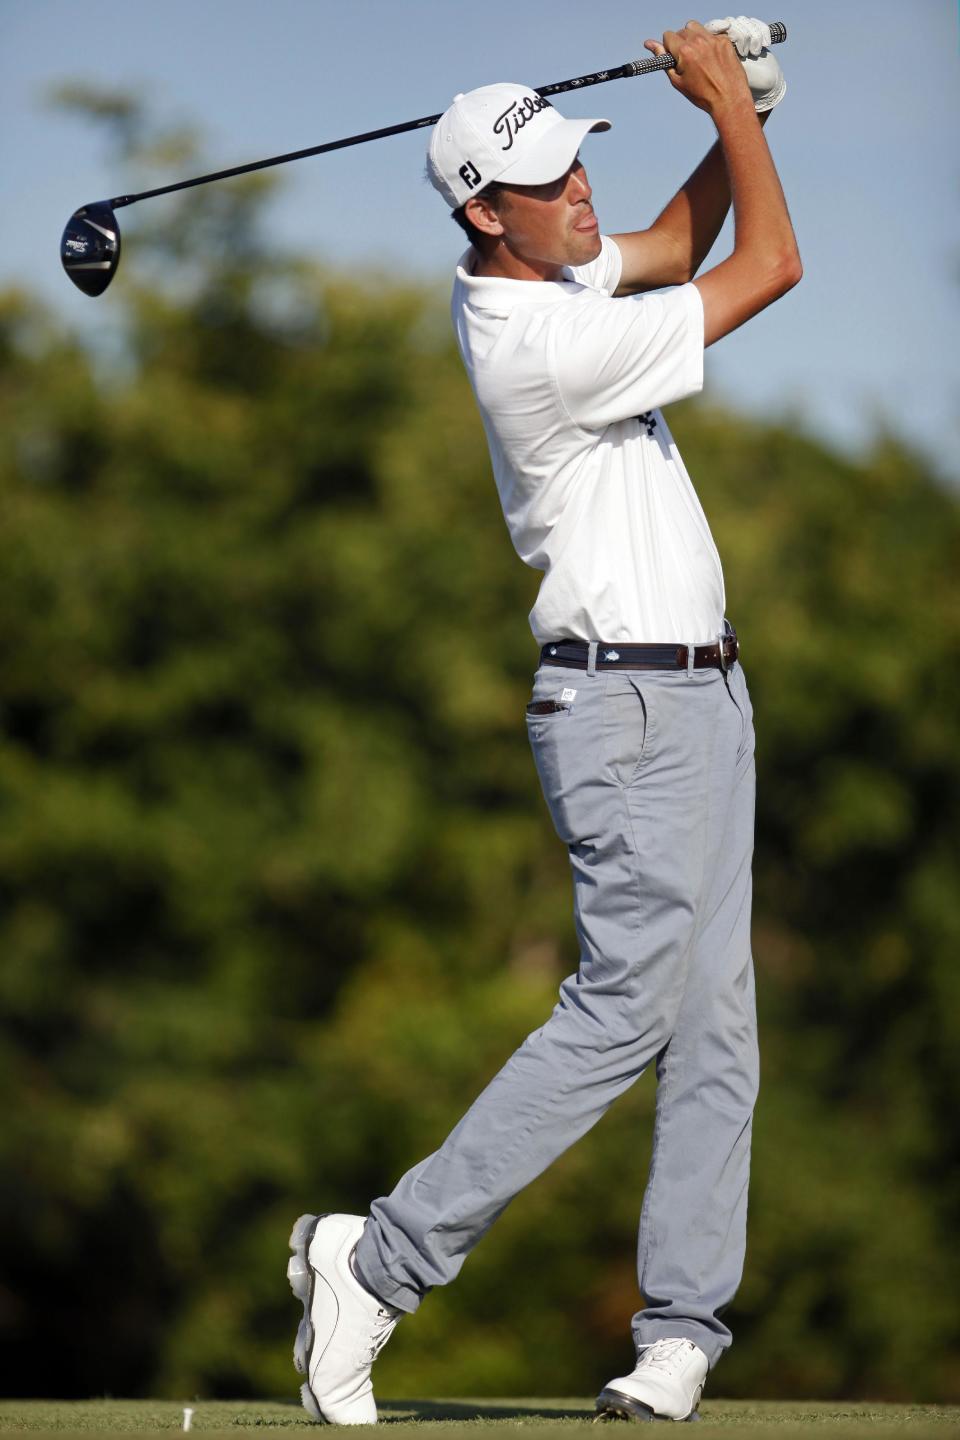 U.S.' Chesson Hadley tees off from the 18th hole during the final round of the Puerto Rico Open PGA golf tournament in Rio Grande, Puerto Rico, Sunday, March 9, 2014. (AP Photo/Ricardo Arduengo)